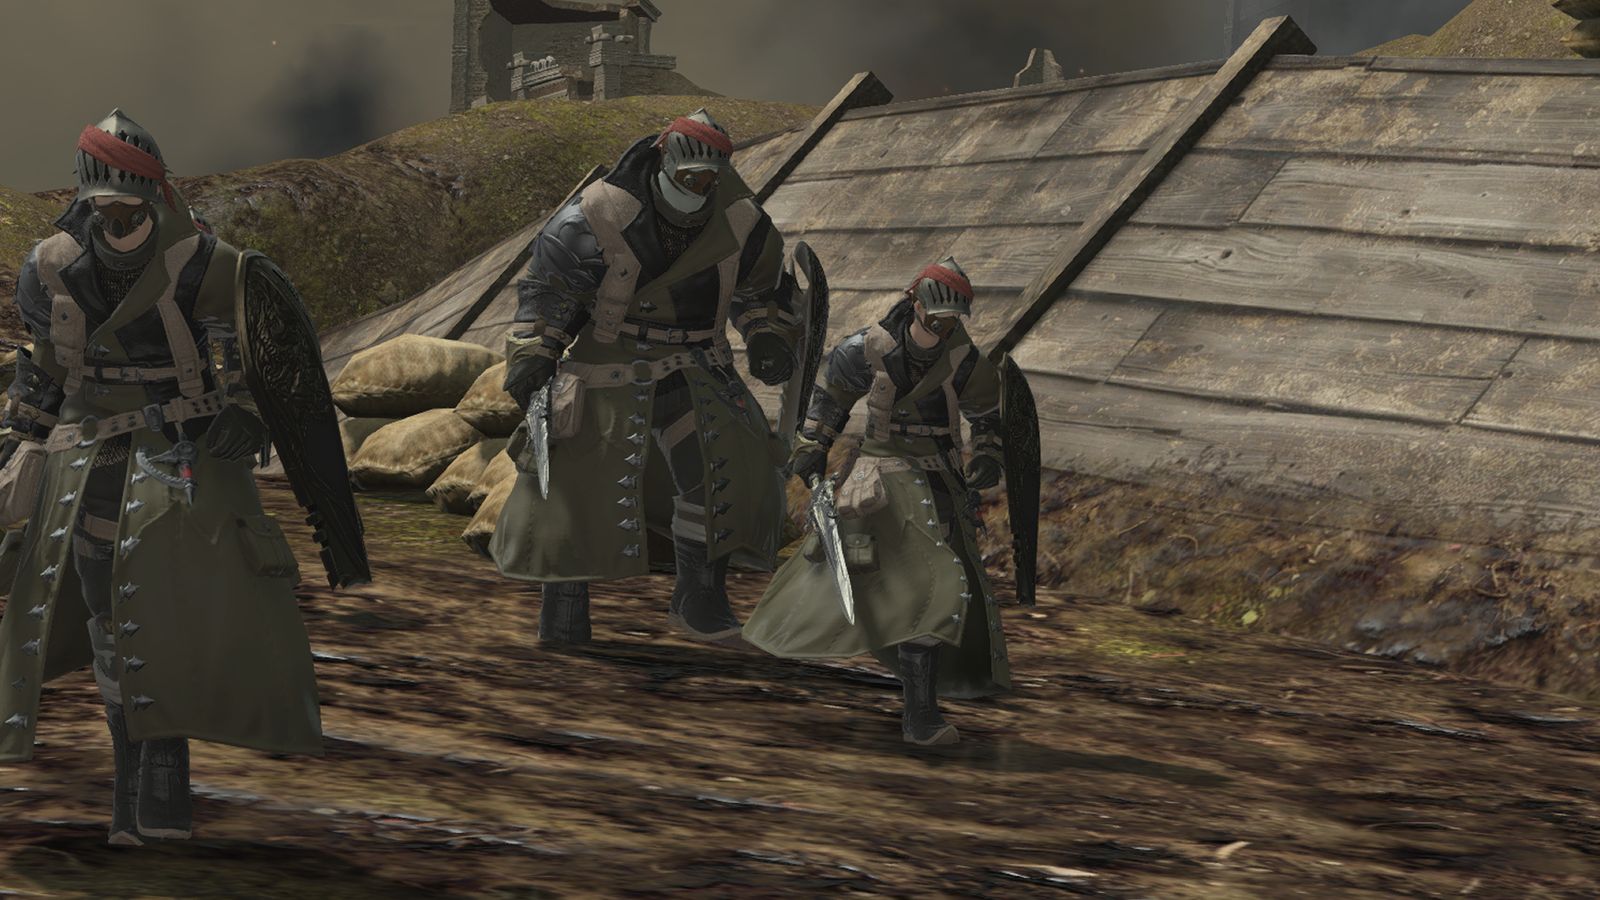 An image of three soldiers moving through the Bozjan Southern Front, a war-torn area used while obtaining the Shadowbringers Relic Weapons. They are dressed in heavy combat gear.